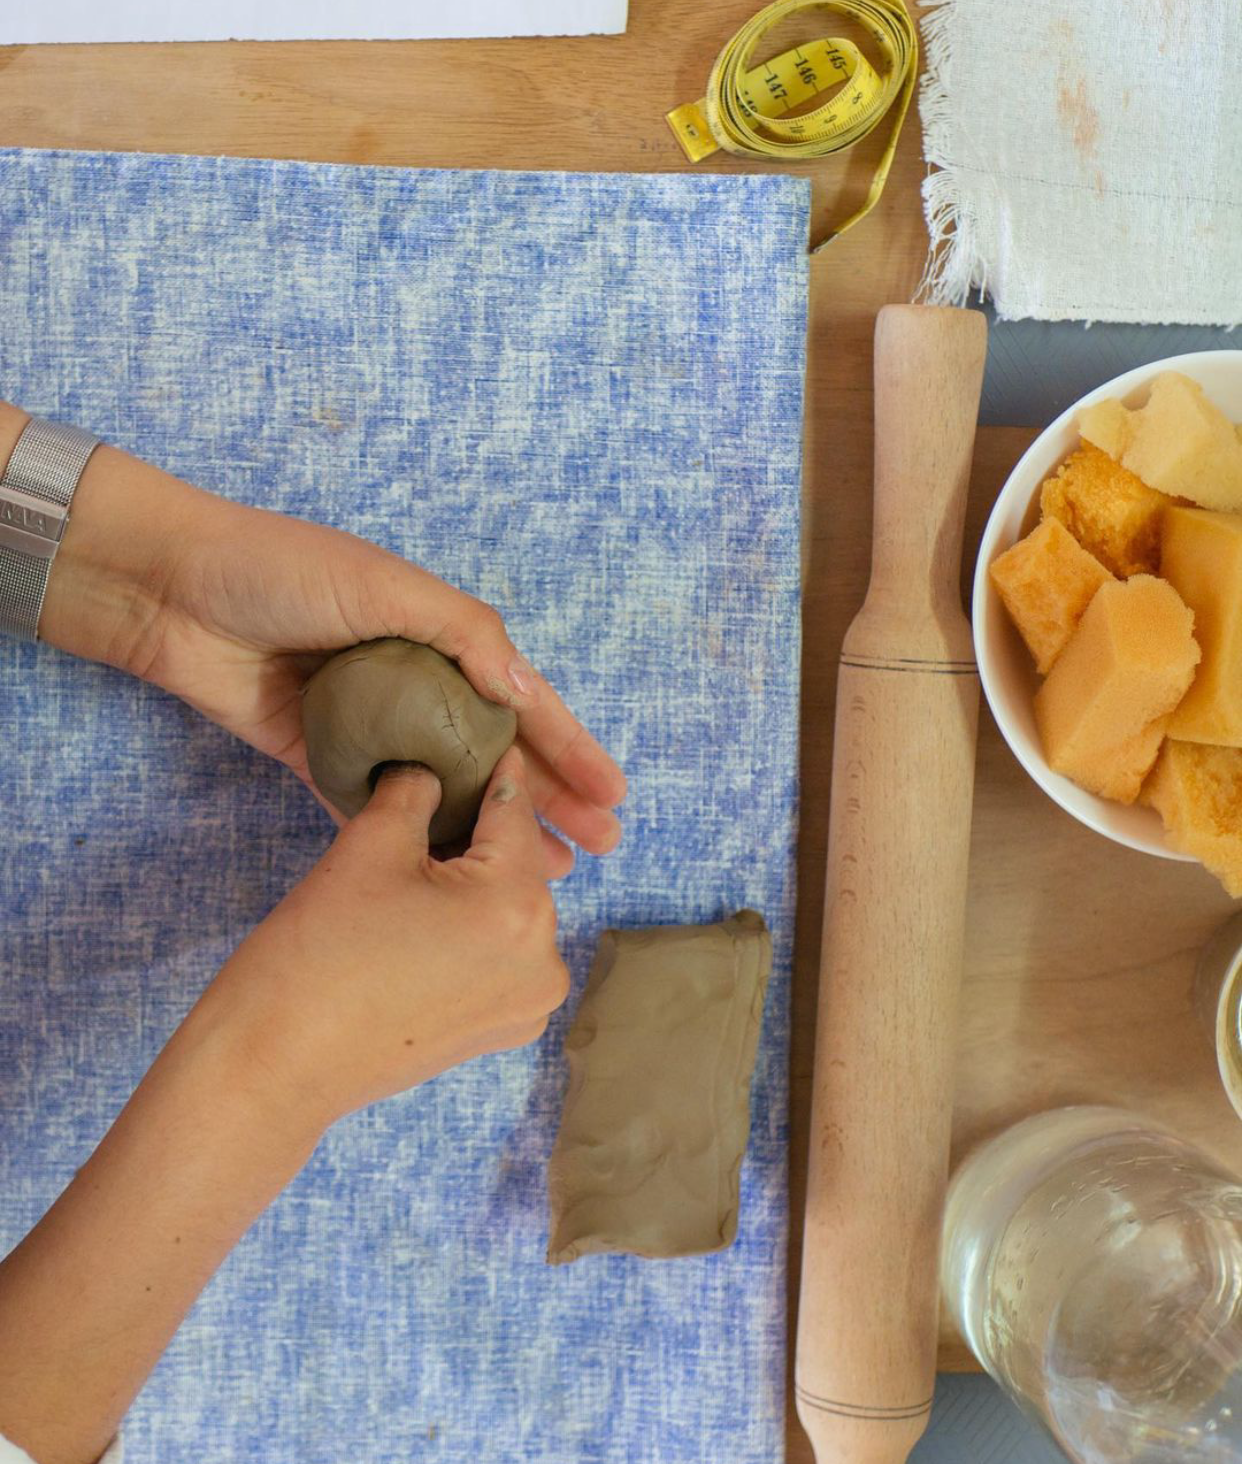 Ceramic Shapes Art Workshop with Anna in Lisbon, Portugal by subcultours